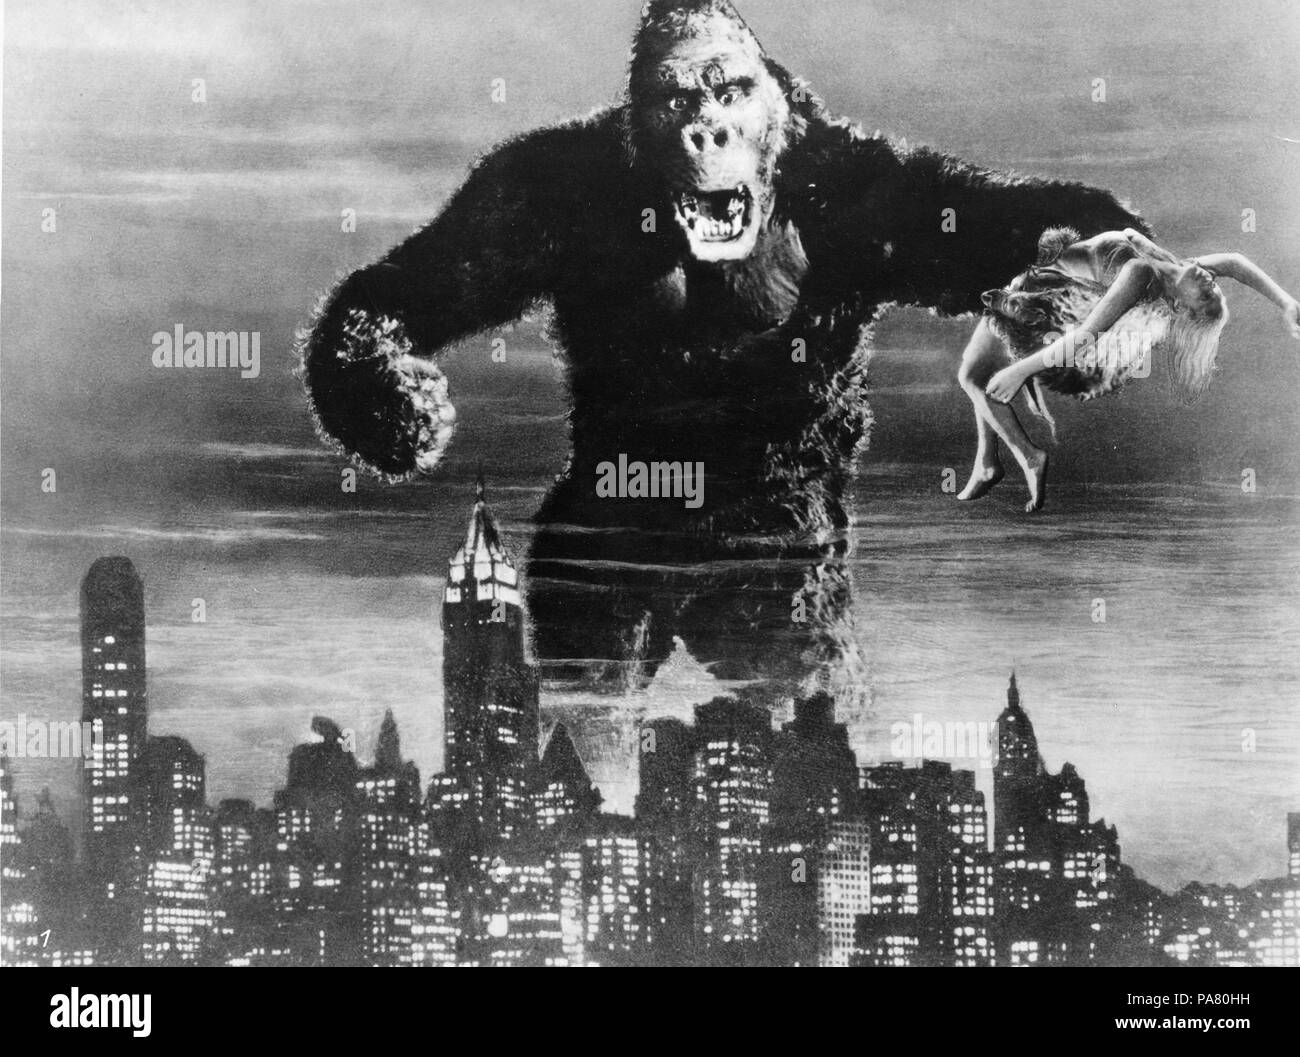 Scene from the film King Kong by Merian C. Cooper and Ernest B. Schoedsack. Museum: PRIVATE COLLECTION. Stock Photo